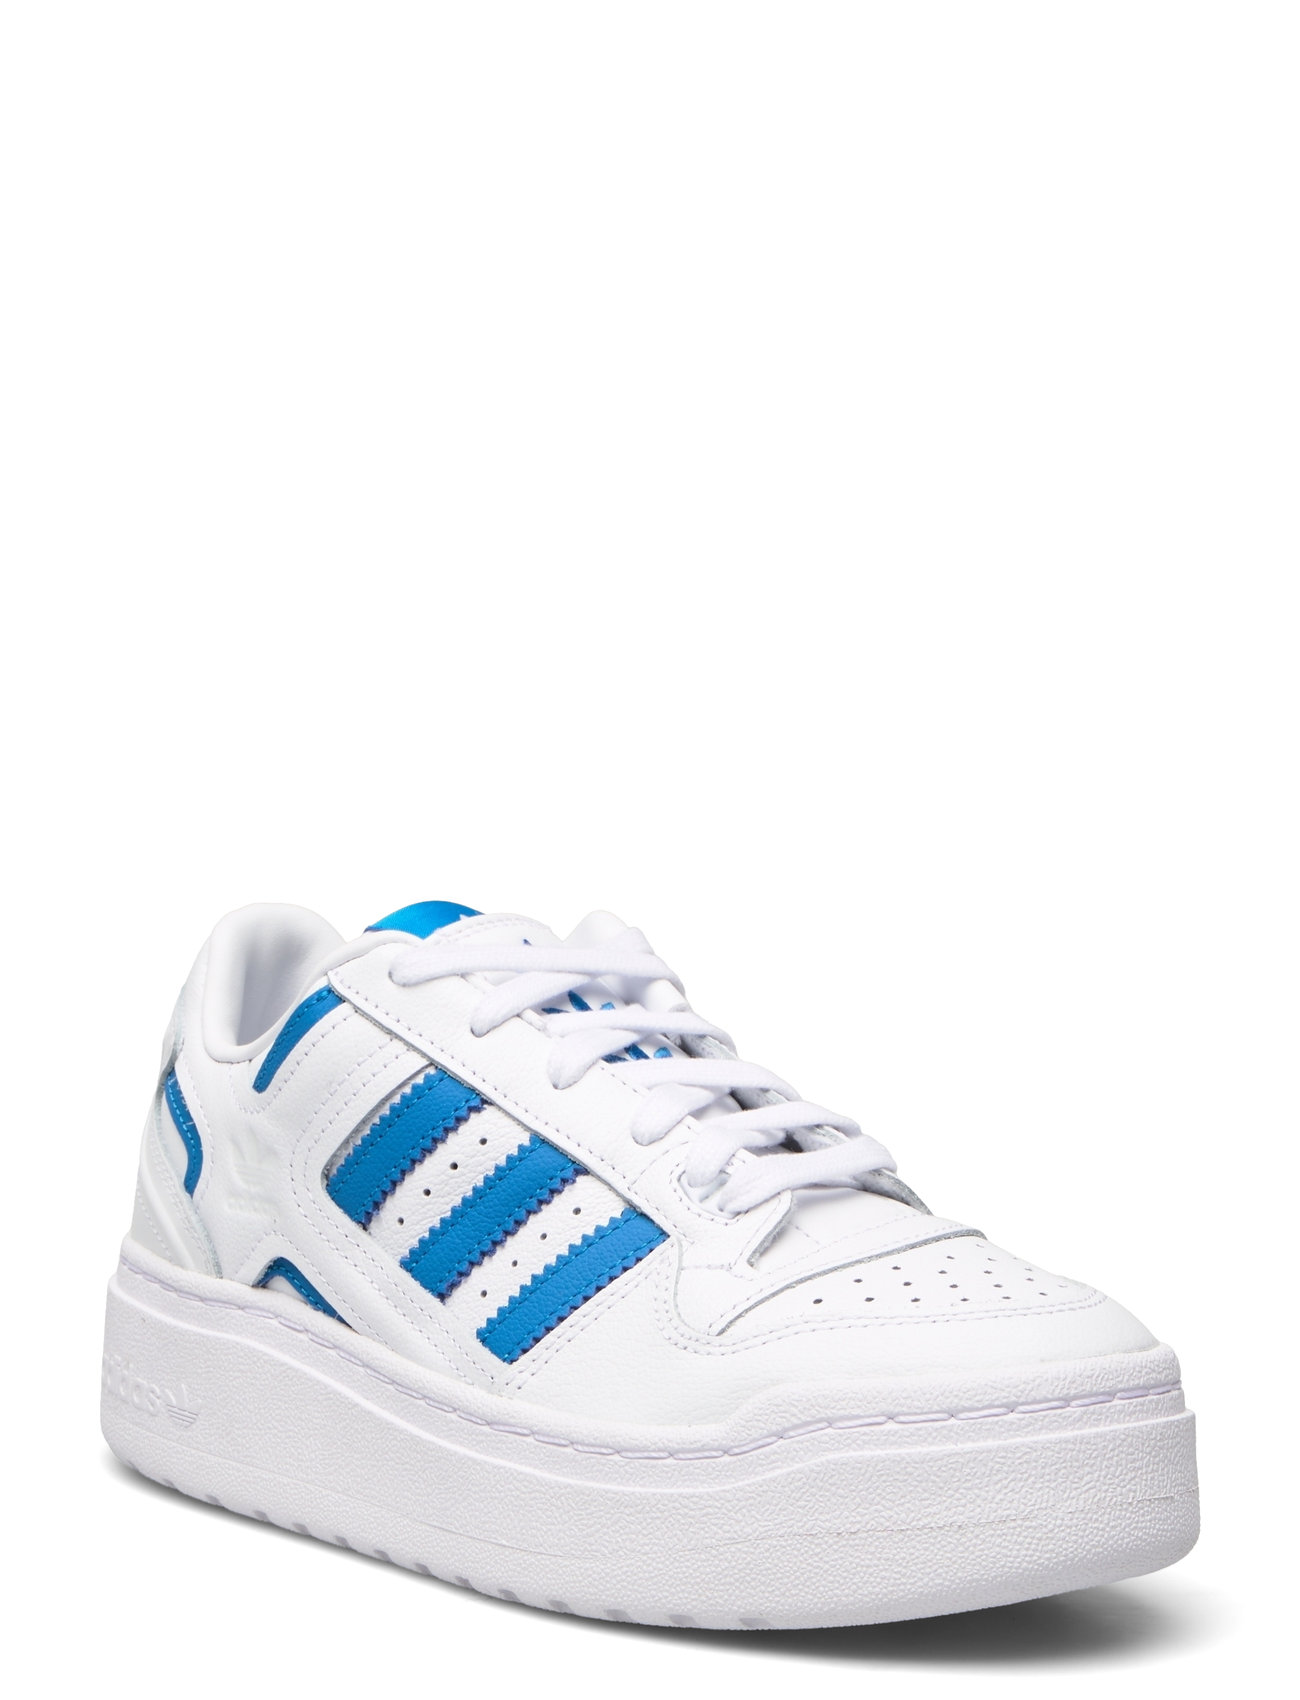 Forum Xlg W Sport Sneakers Low-top Sneakers White Adidas Originals